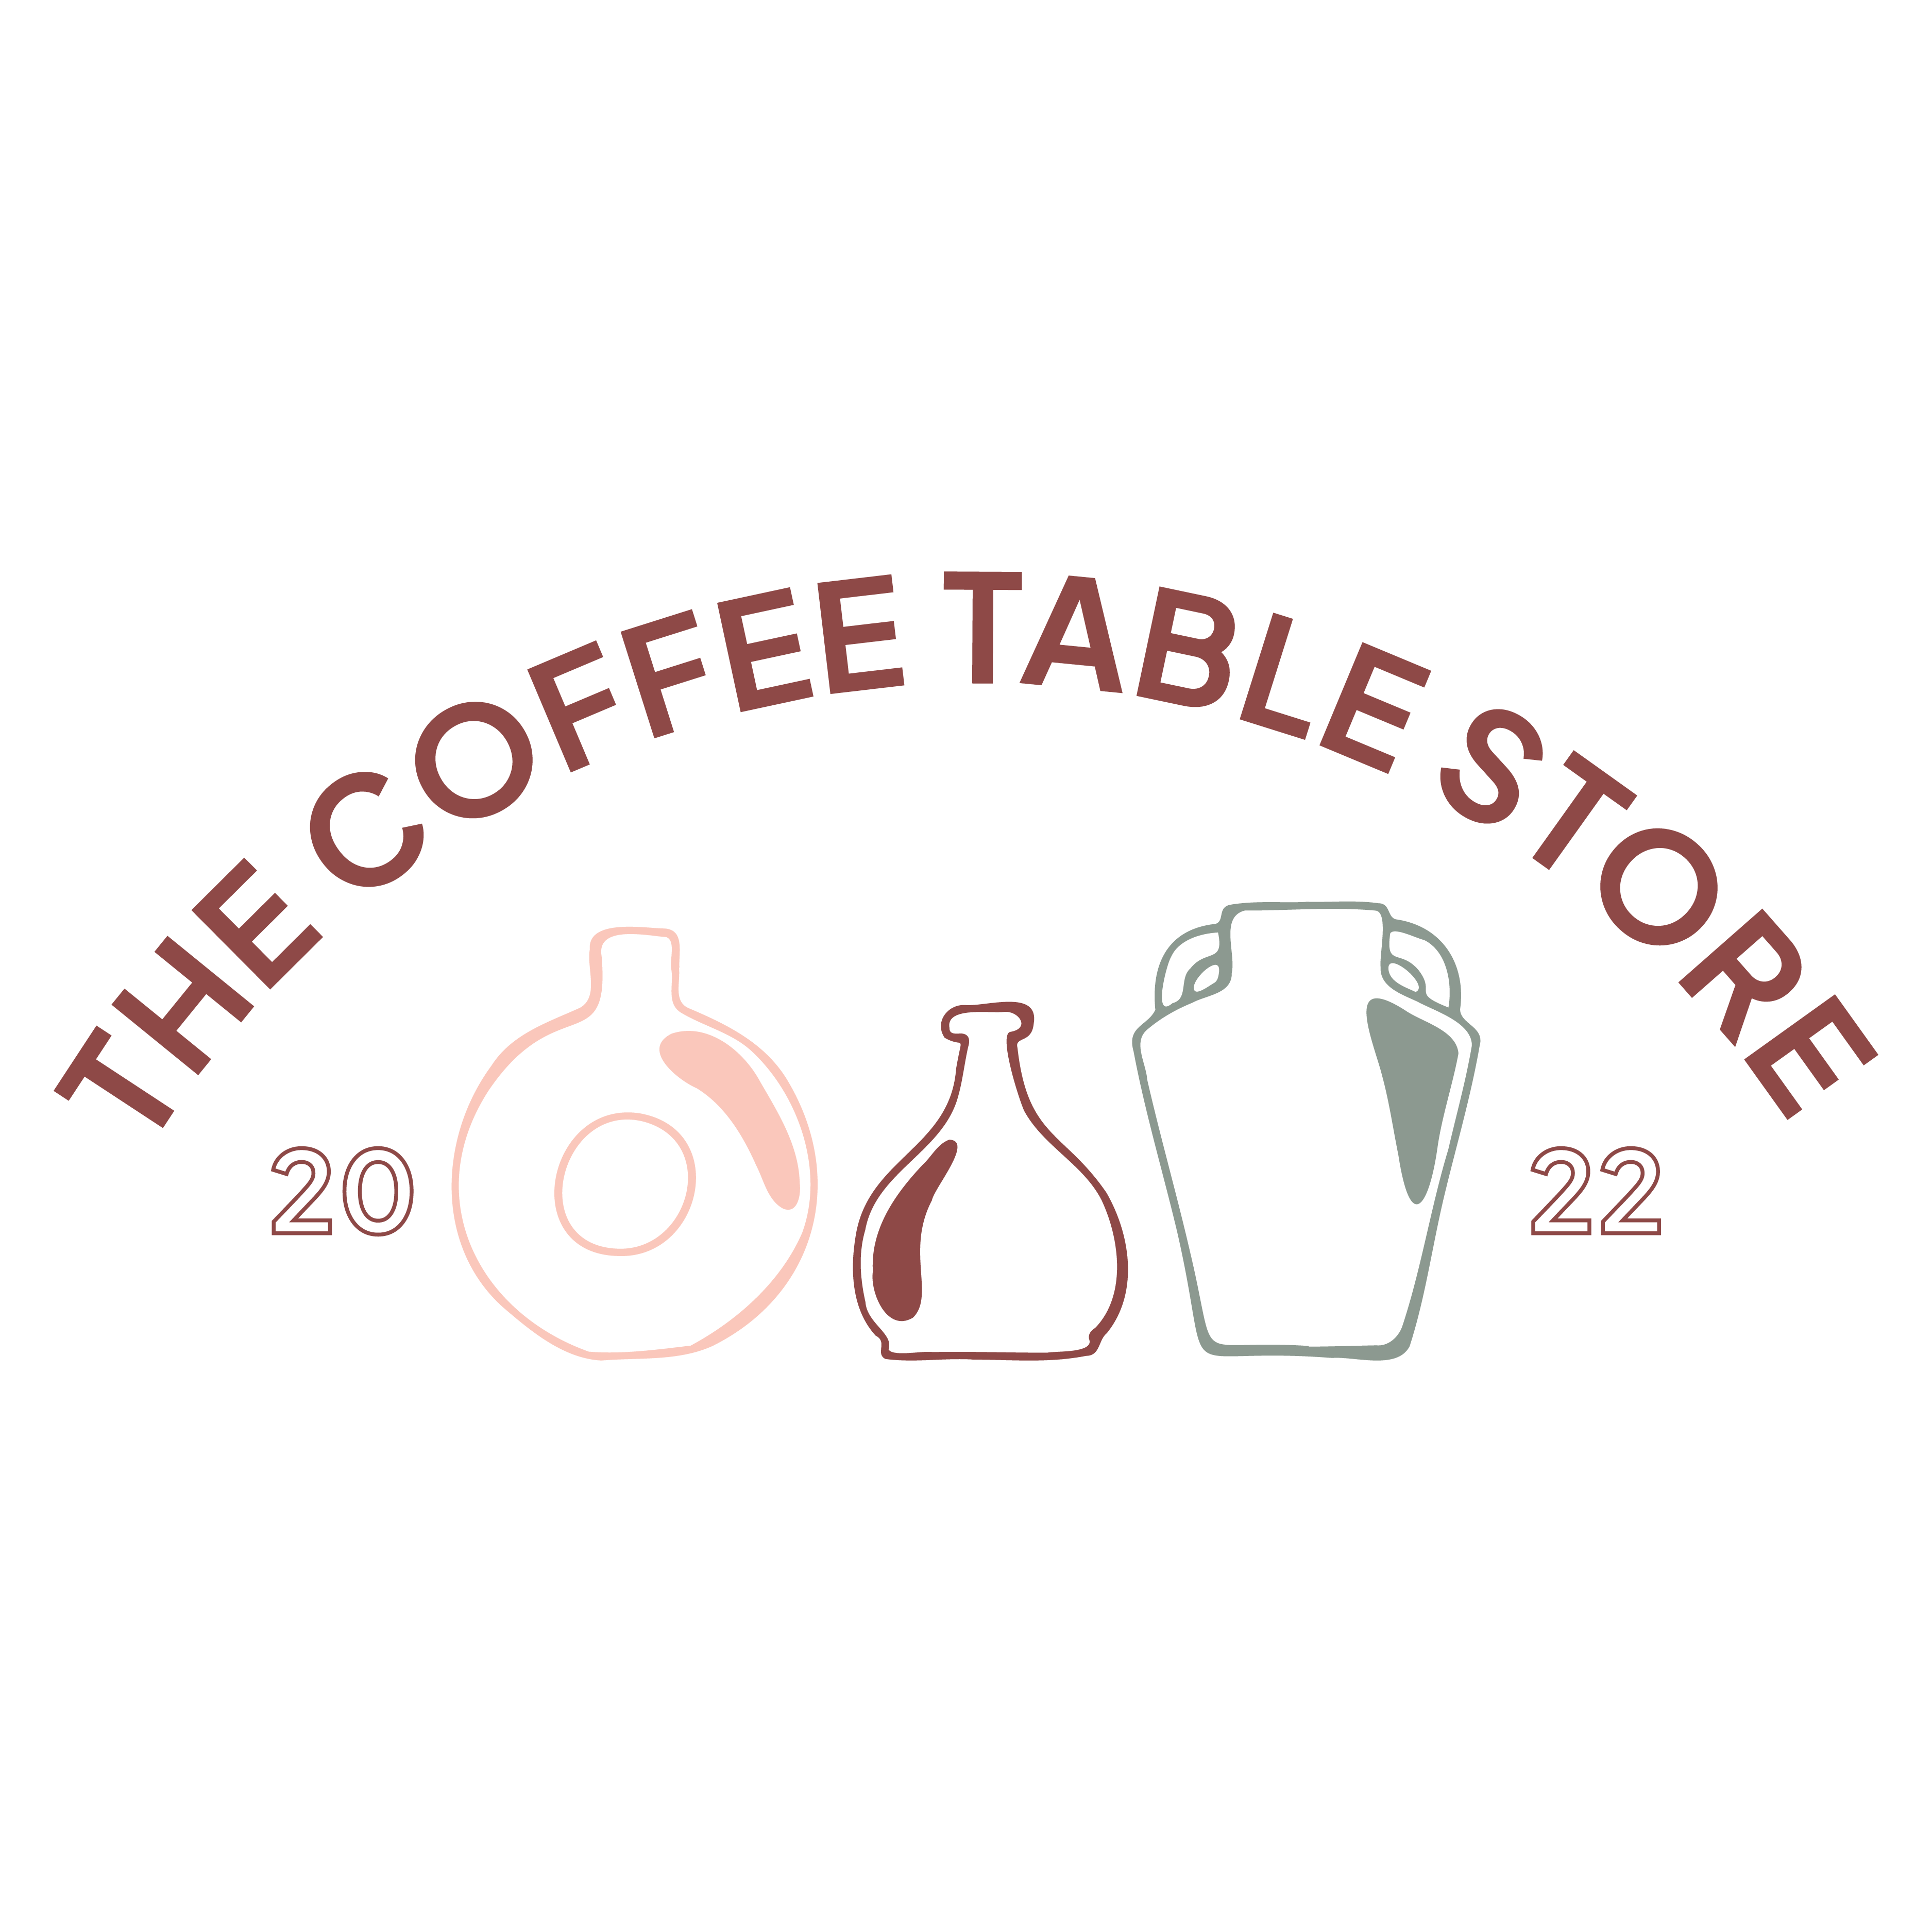 The+Coffee+Table+Store+Mark logo design by logo designer ESM+Creative+Studio+ for your inspiration and for the worlds largest logo competition